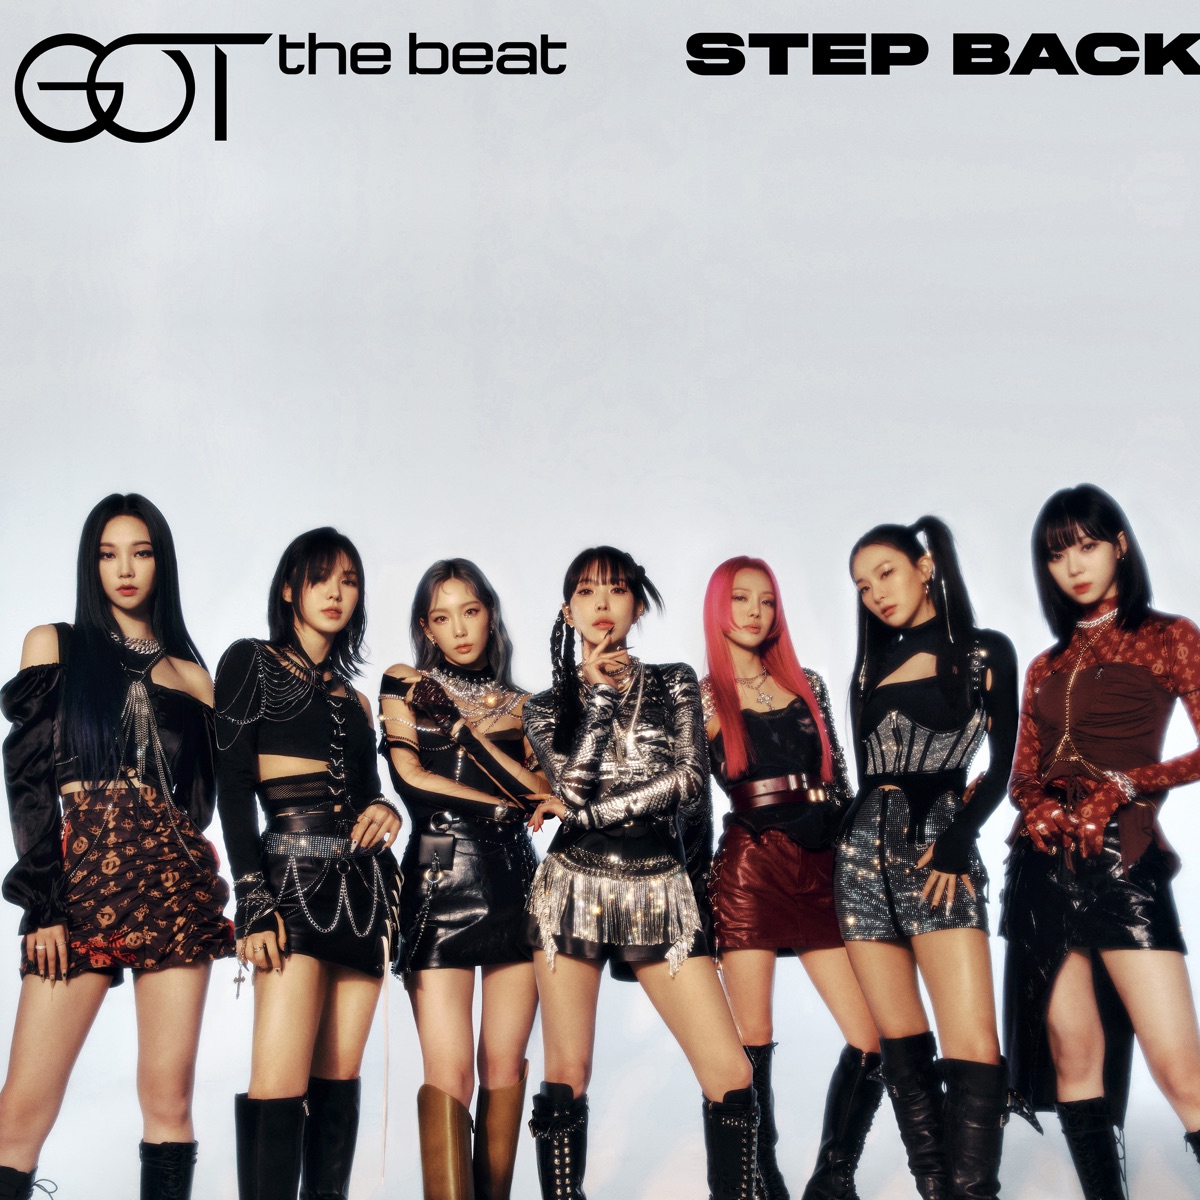 Cover for『GOT the beat (Girls On Top) - Step Back』from the release『Step Back』